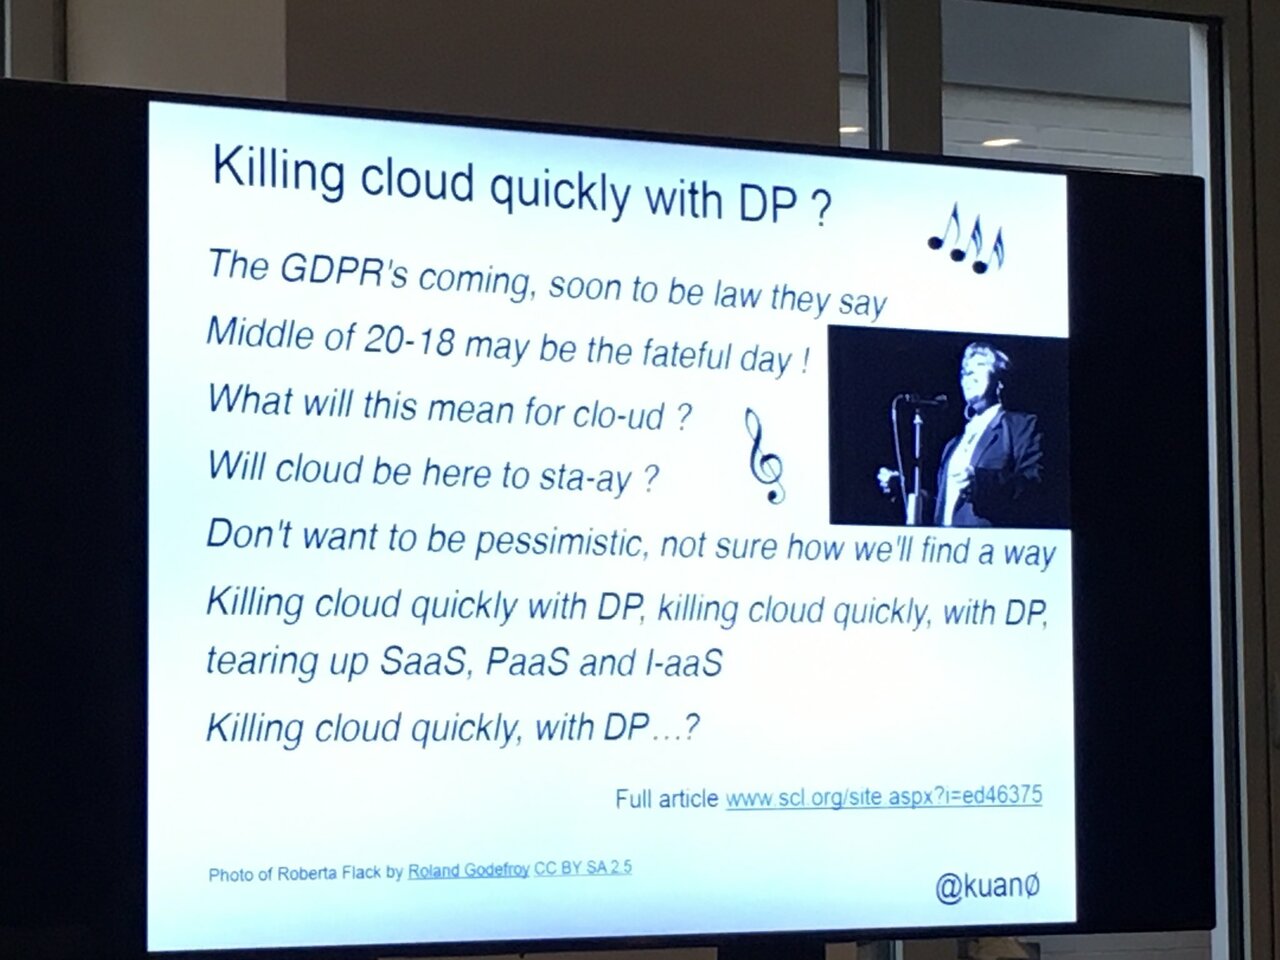 Will Data Protection kill the Cloud? #cloudscape2016 #dataprotection https://t.co/dS3PWQ0SNd